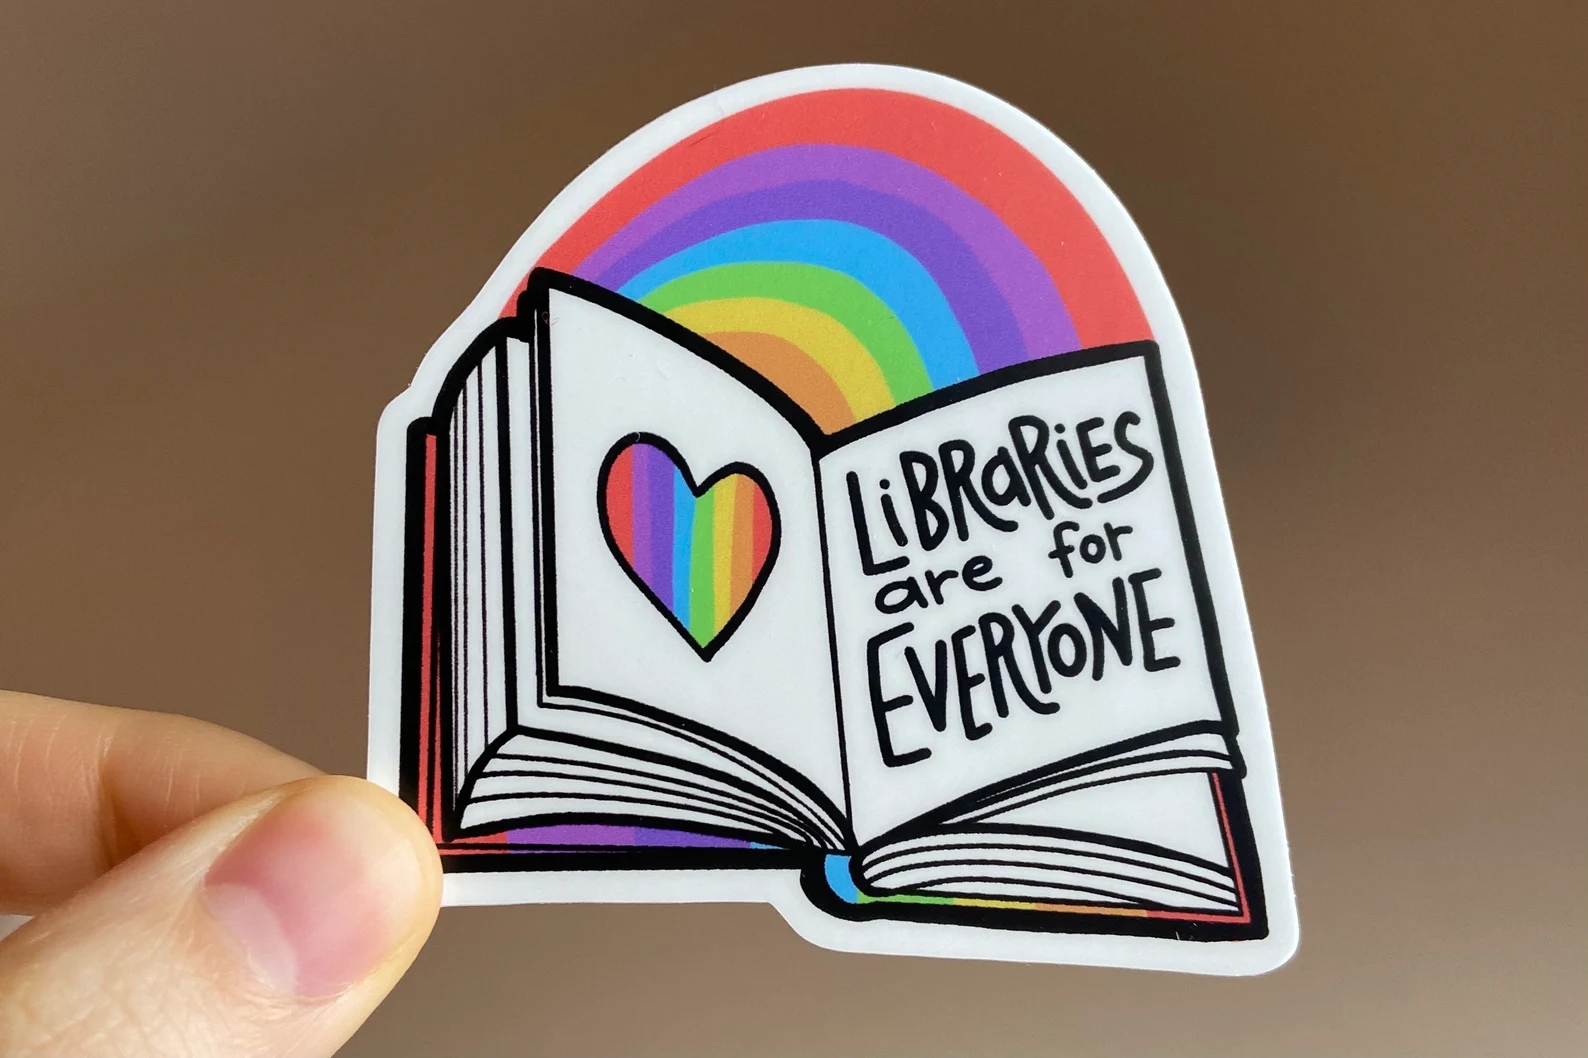 Image of an open book with a rainbow above it. The book page says "libraries are for everyone."